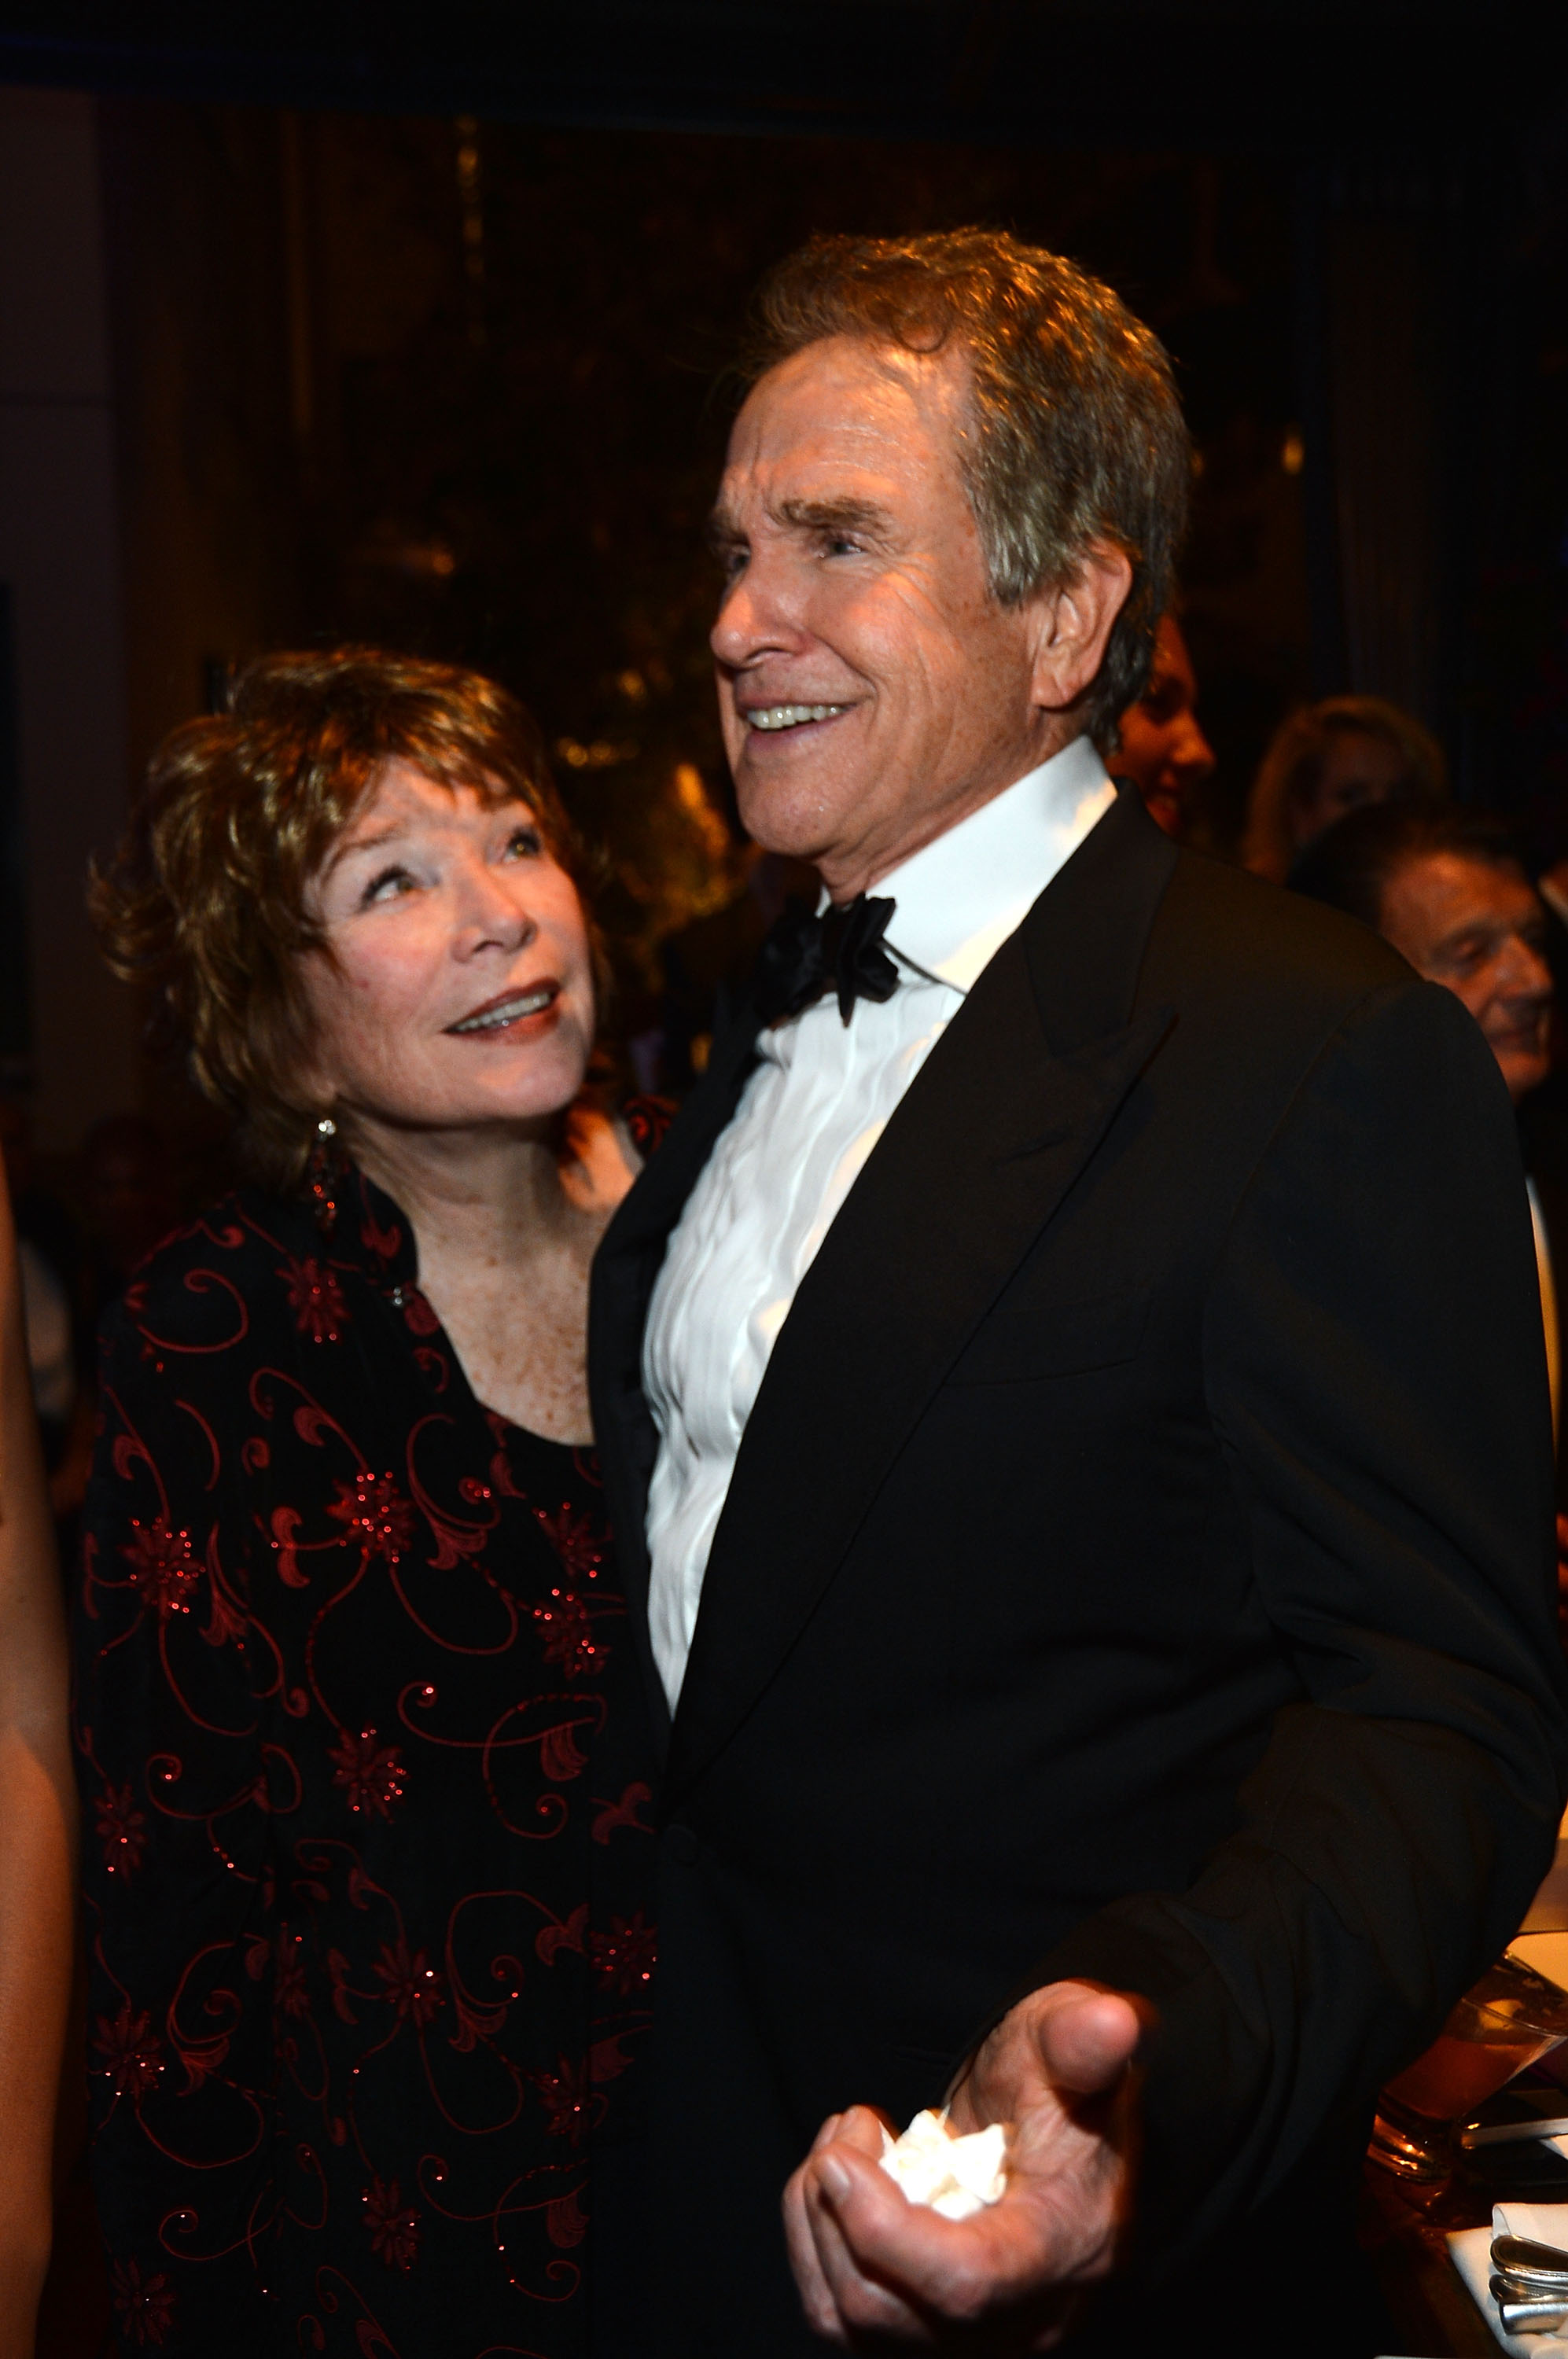 hirley MacLaine and Warren Beatty attend the after party for the 40th AFI Life Achievement Award honoring Shirley MacLaine held in Culver City, California, on June 7, 2012. | Source: Getty Images